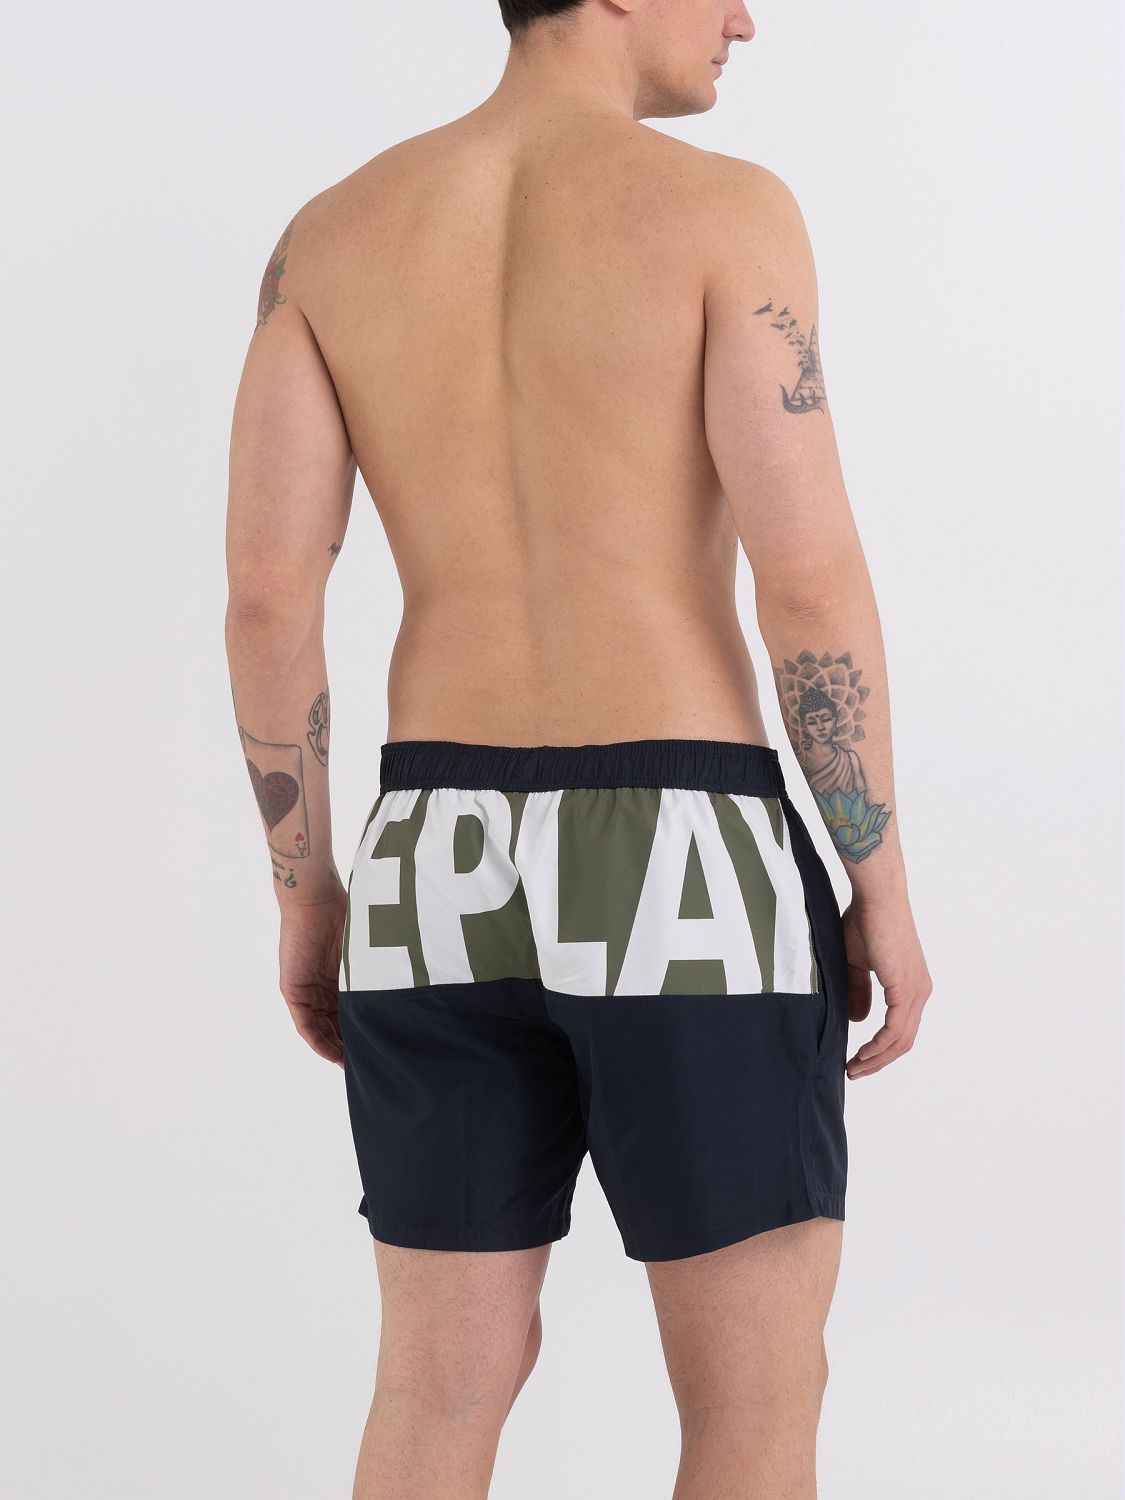 Swimming Trunks with Contrasting-colored Print